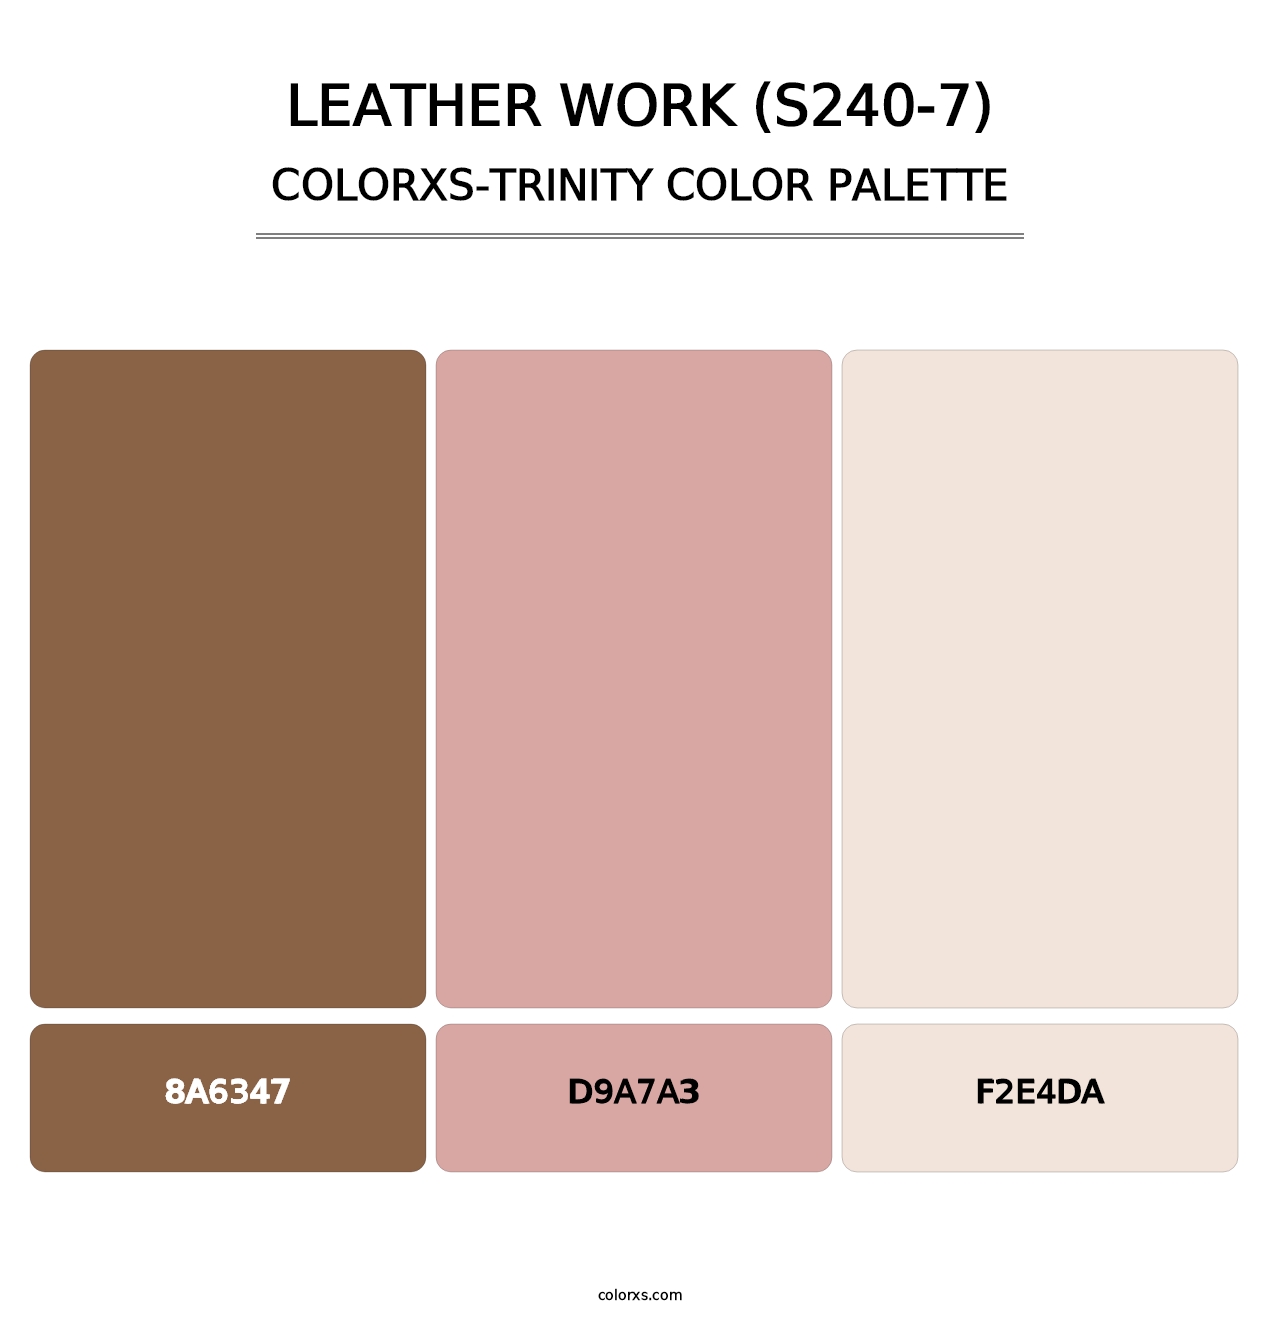 Leather Work (S240-7) - Colorxs Trinity Palette